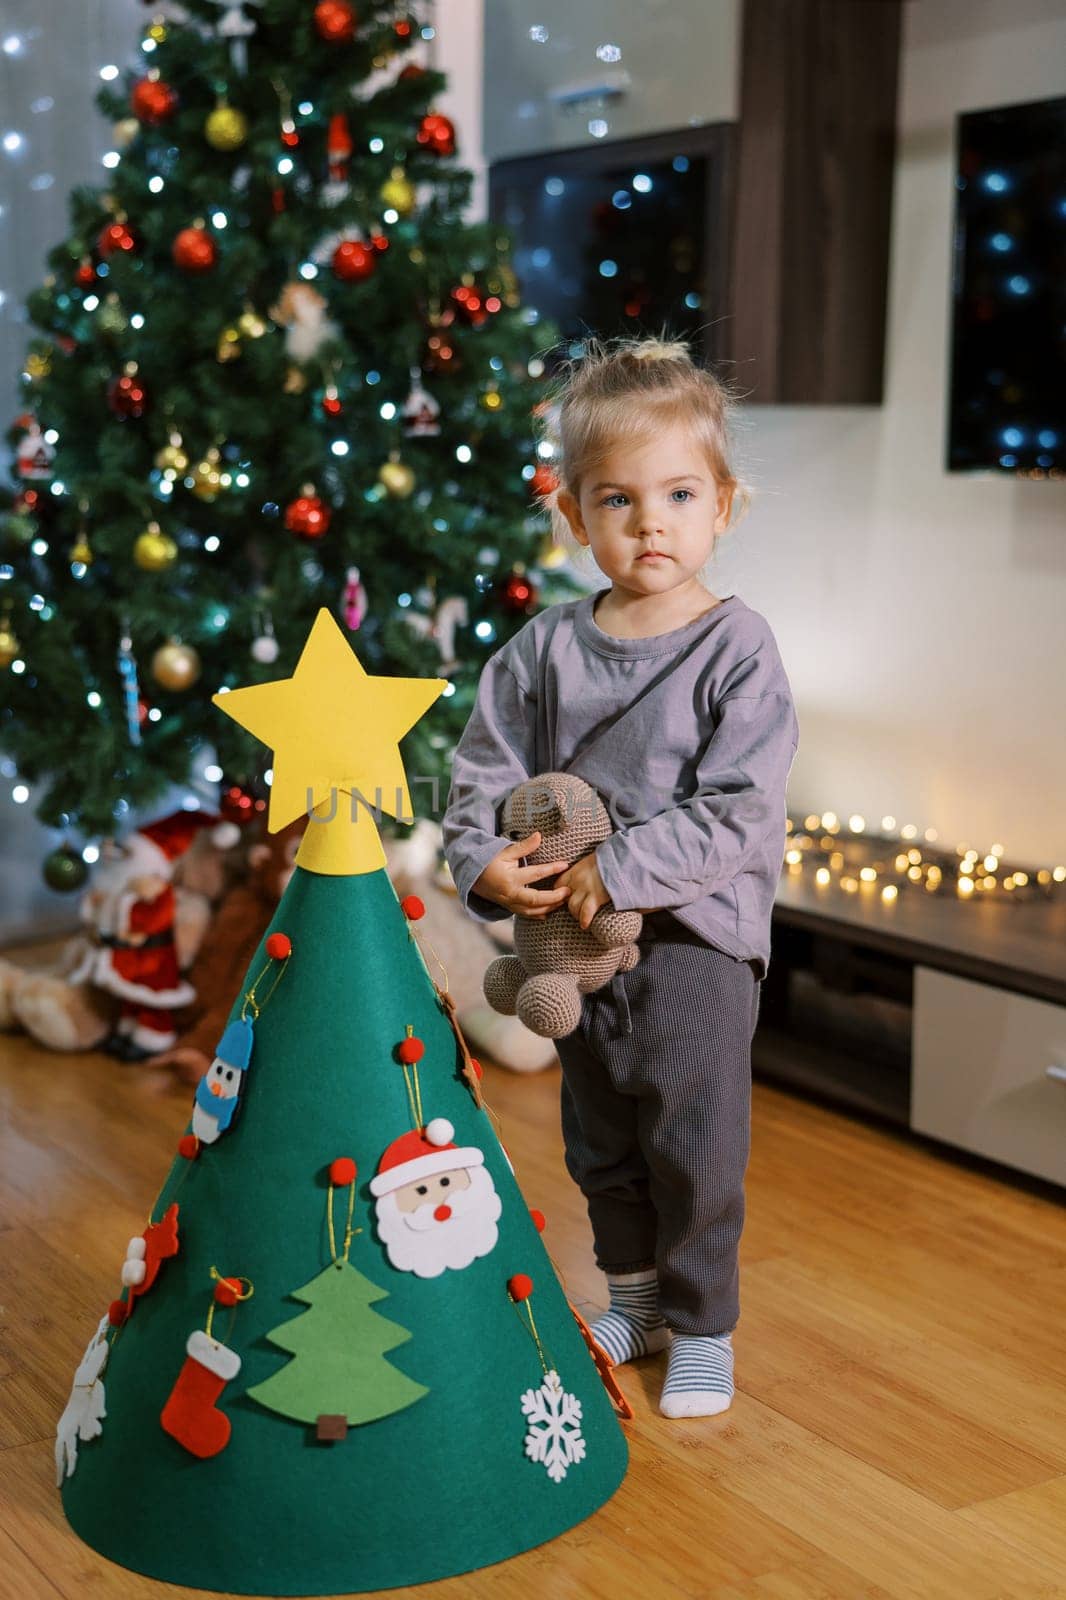 Little girl stands with a teddy bear near a decorated toy Christmas tree. High quality photo